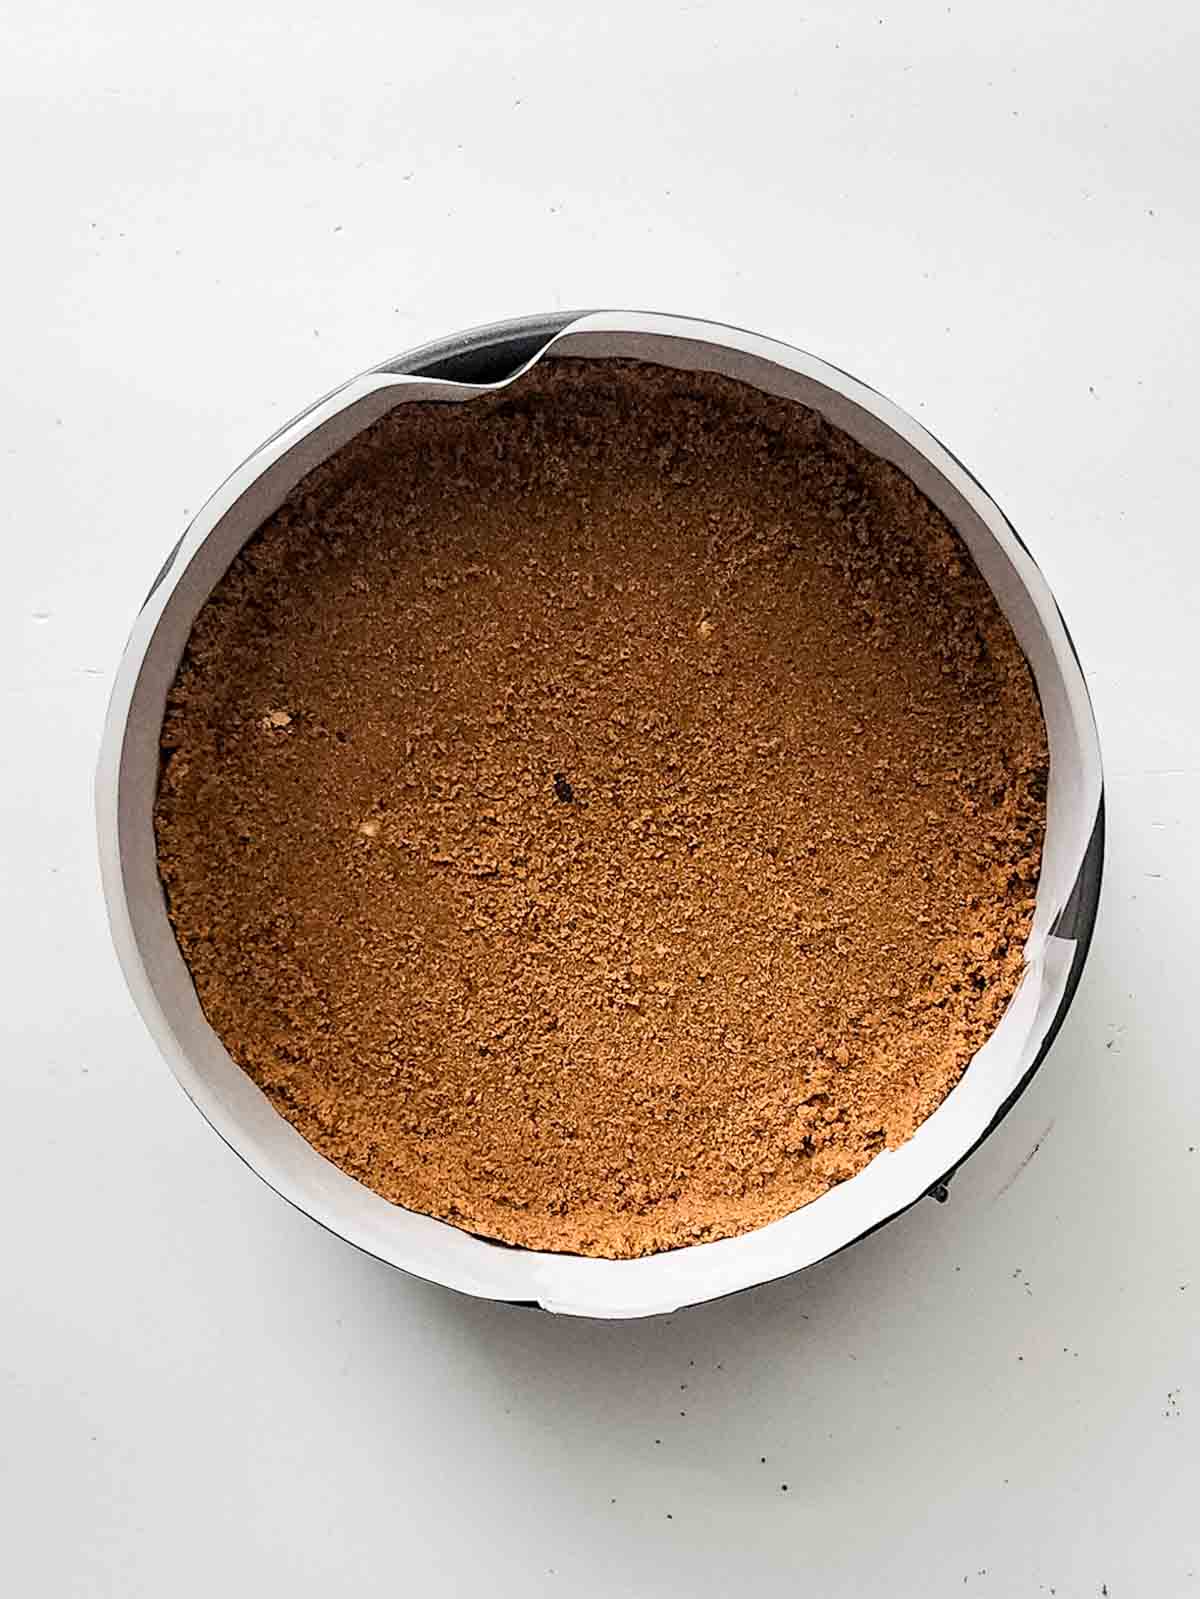 The flattened crust in the lined cake pan.